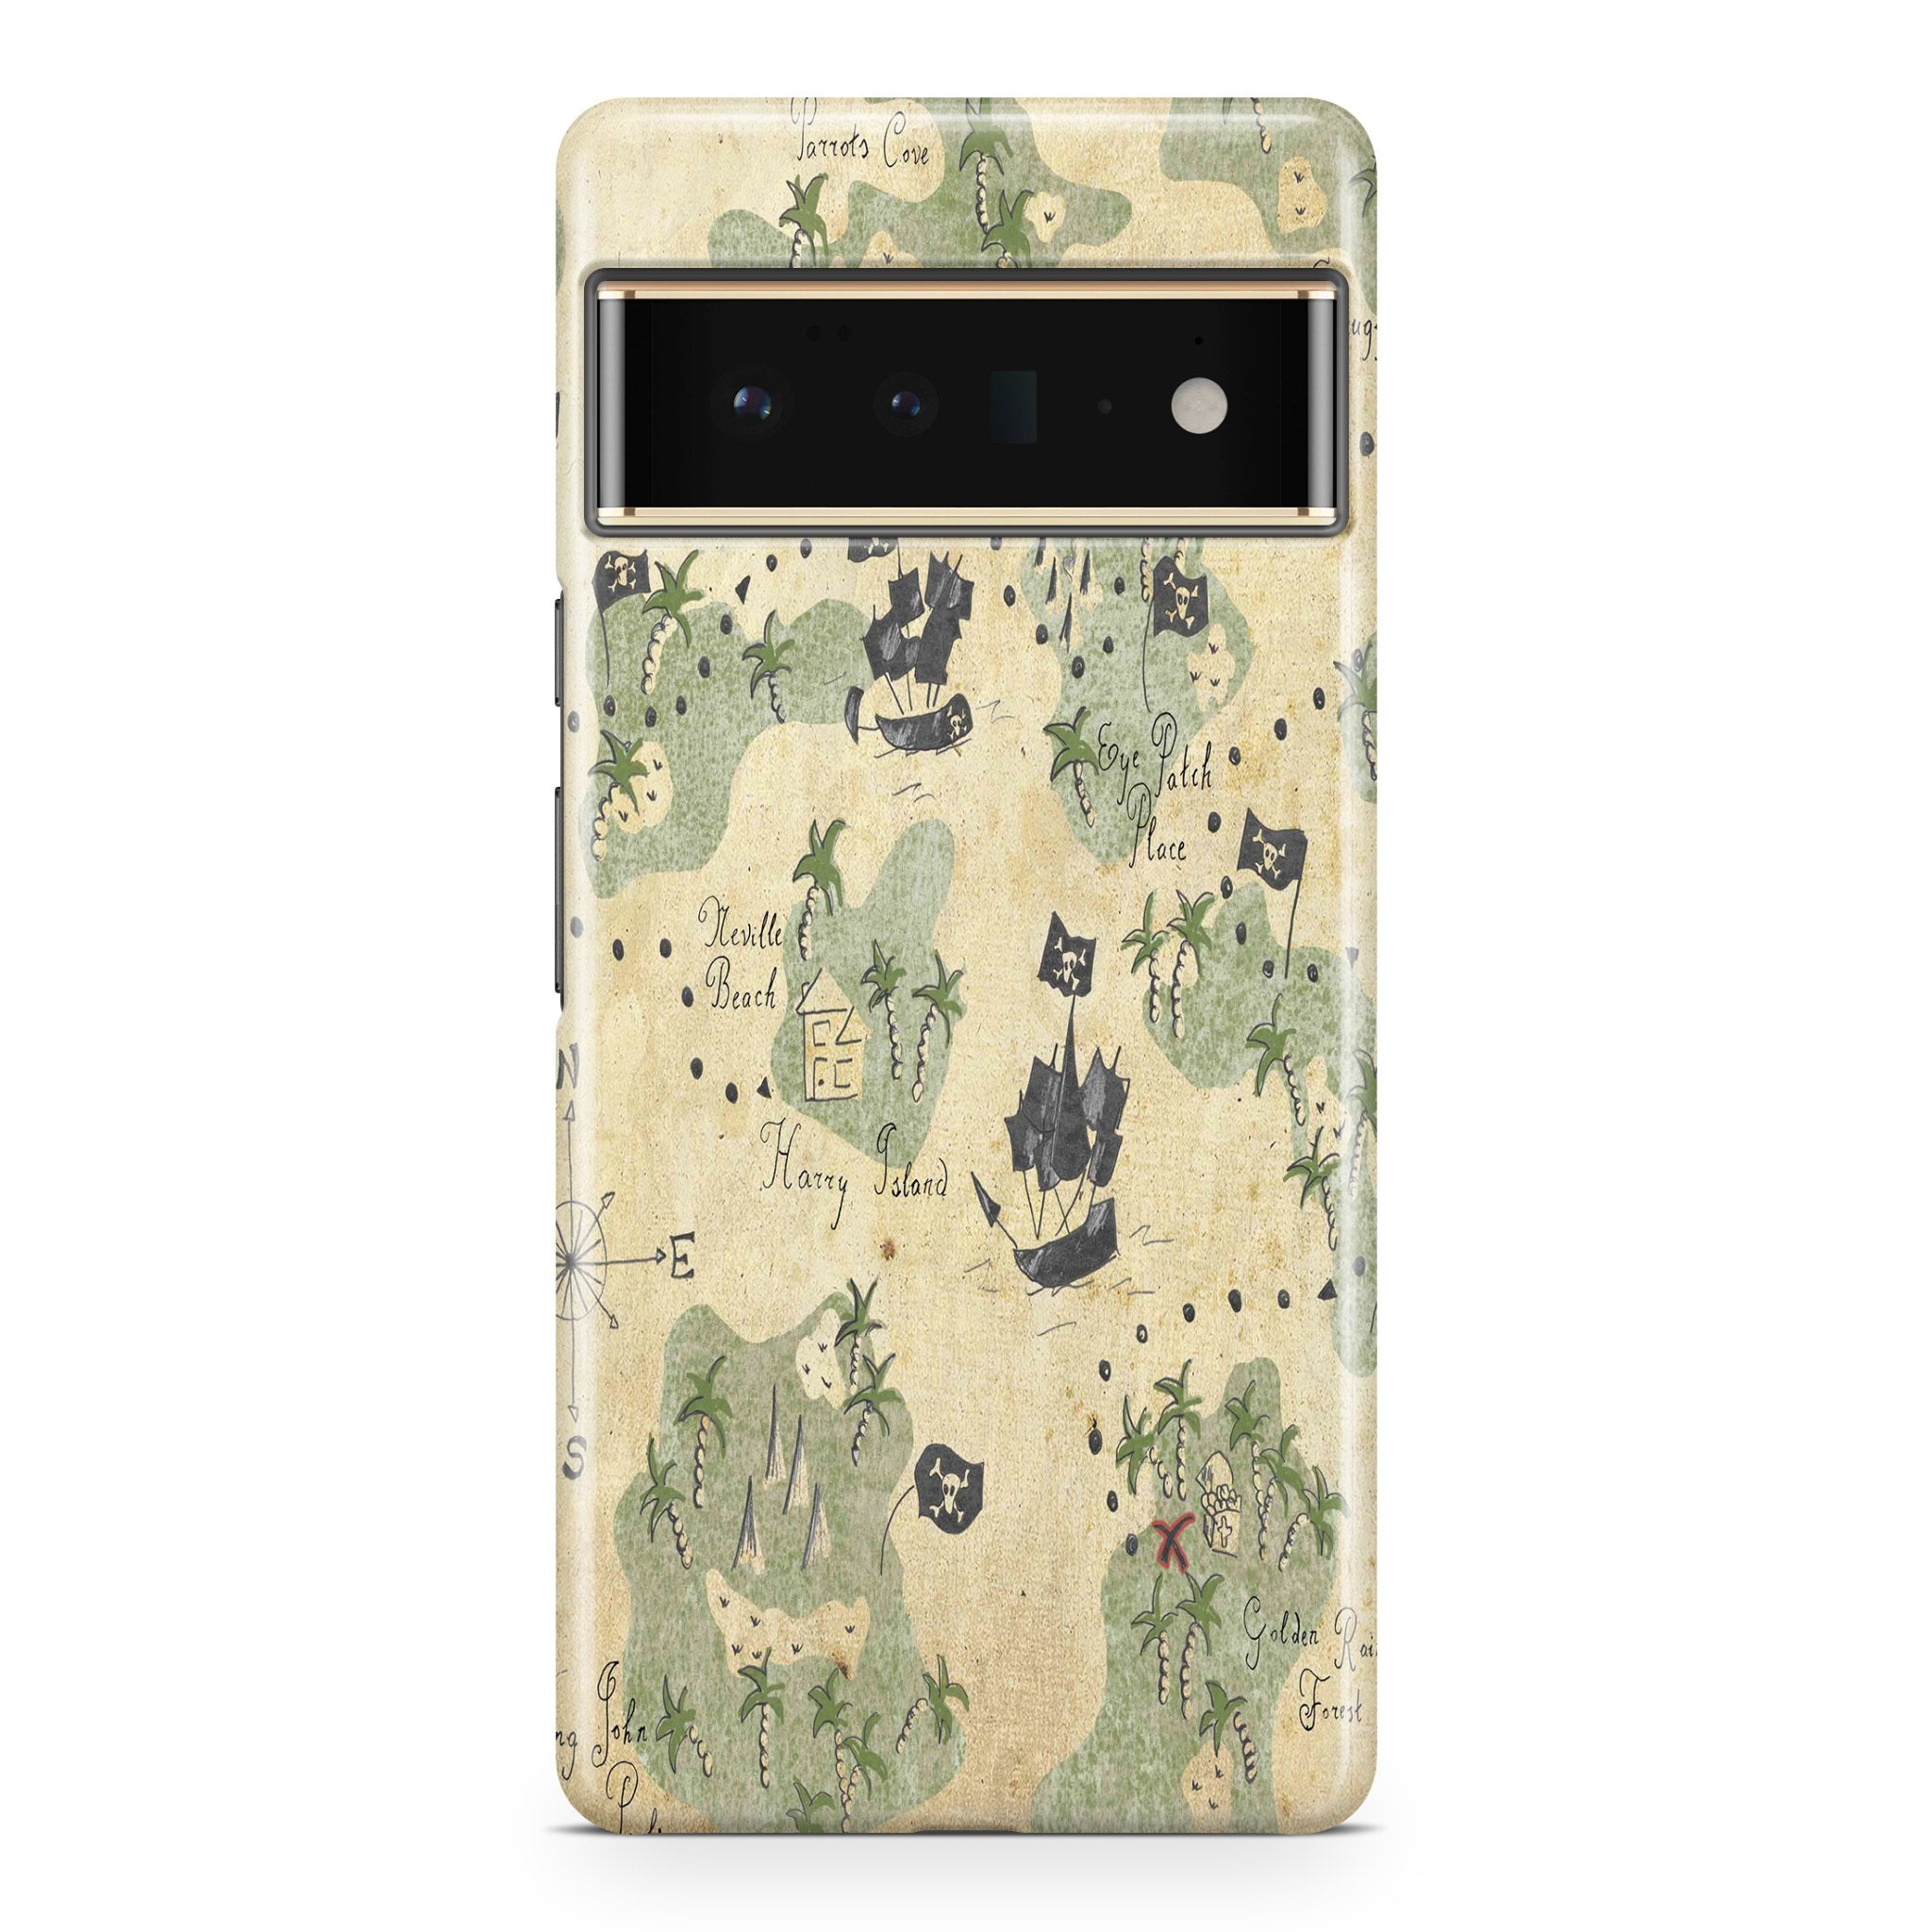 Pirate Map - Google phone case designs by CaseSwagger